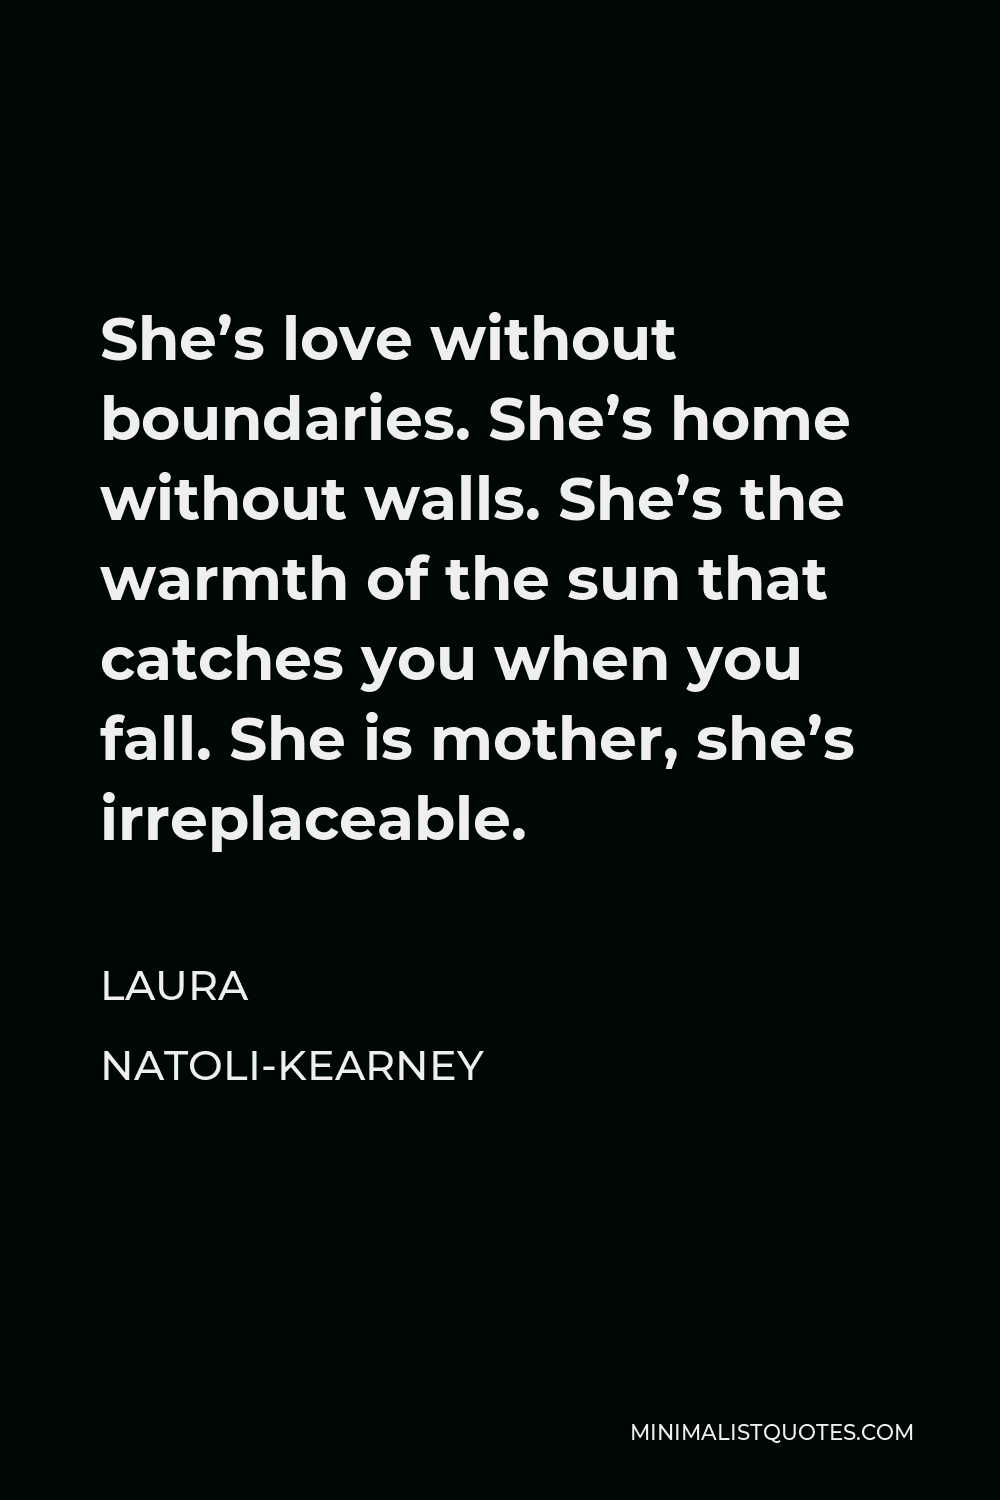 Laura Natoli-Kearney Quote - She’s love without boundaries. She’s home without walls. She’s the warmth of the sun that catches you when you fall. She is mother, she’s irreplaceable.